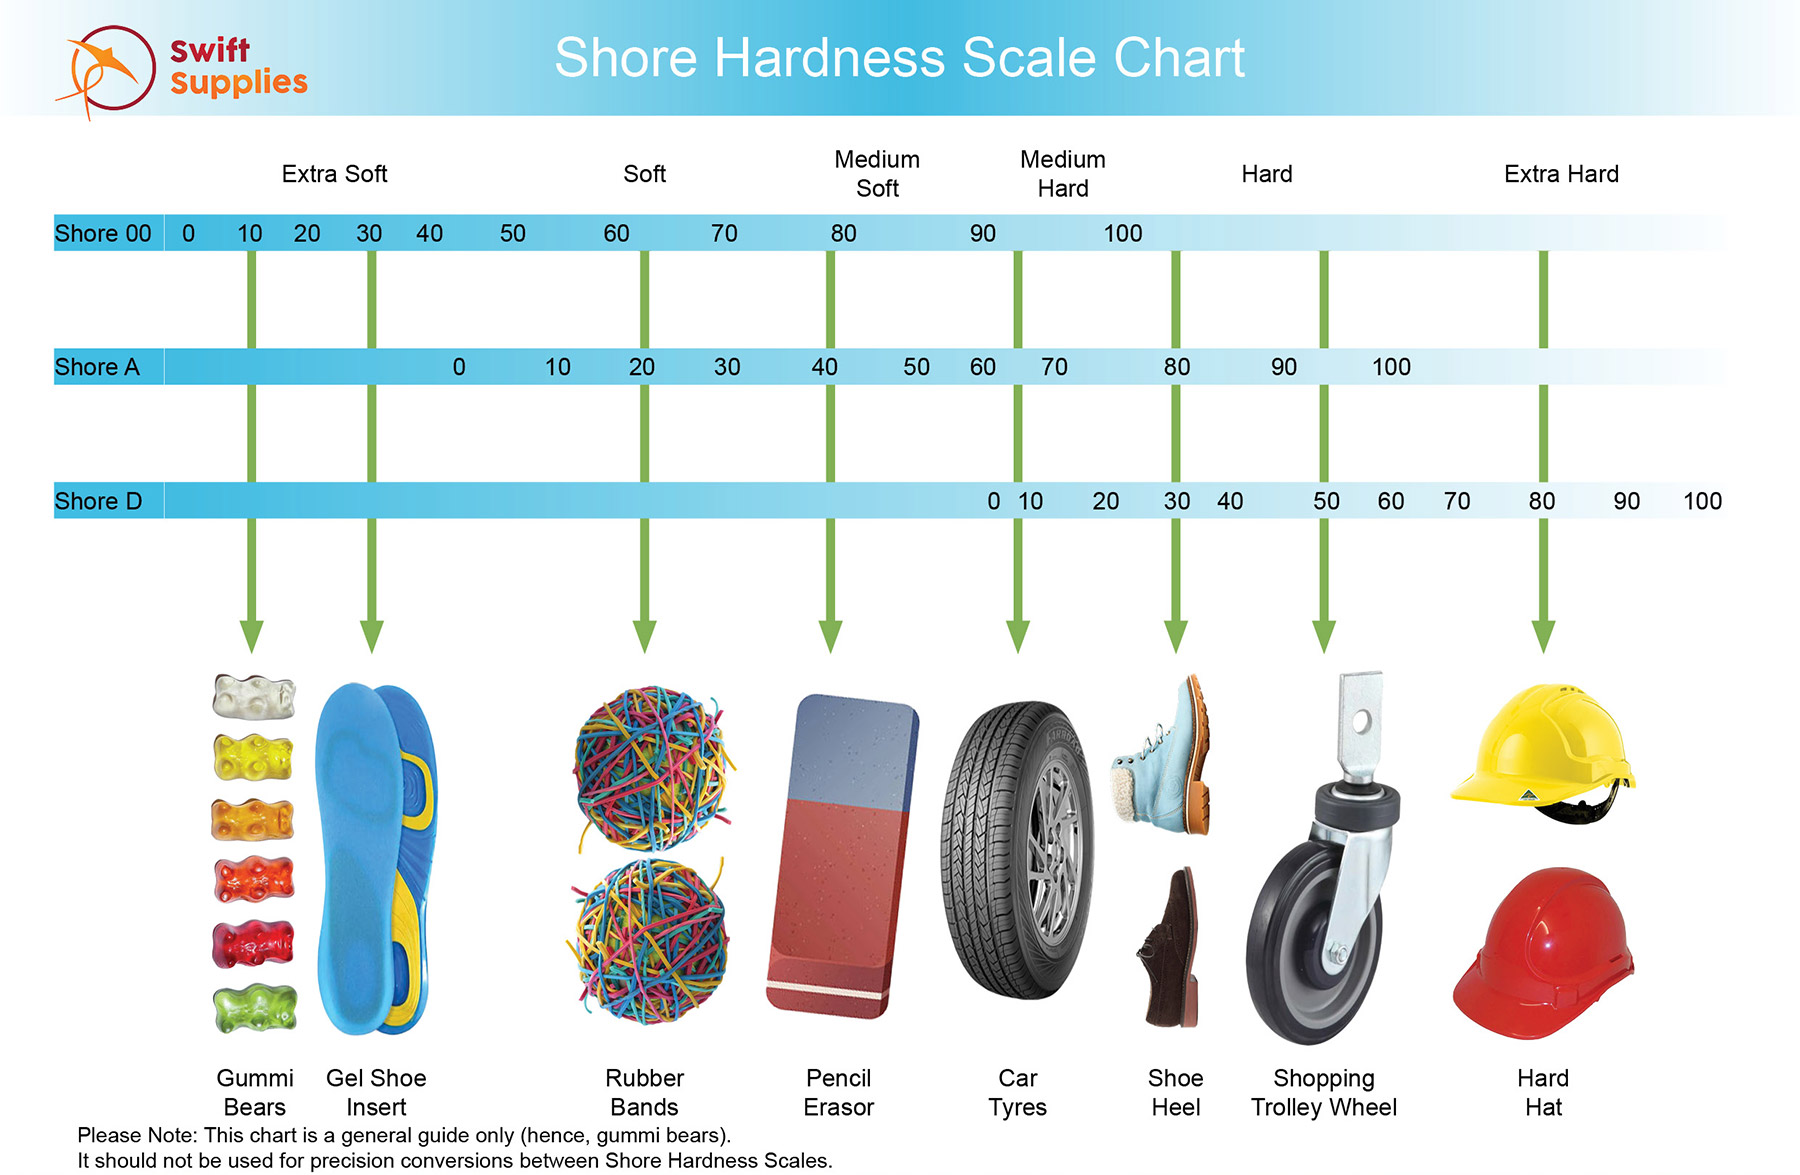 Swift Supplies Shore Hardness Scale Chart